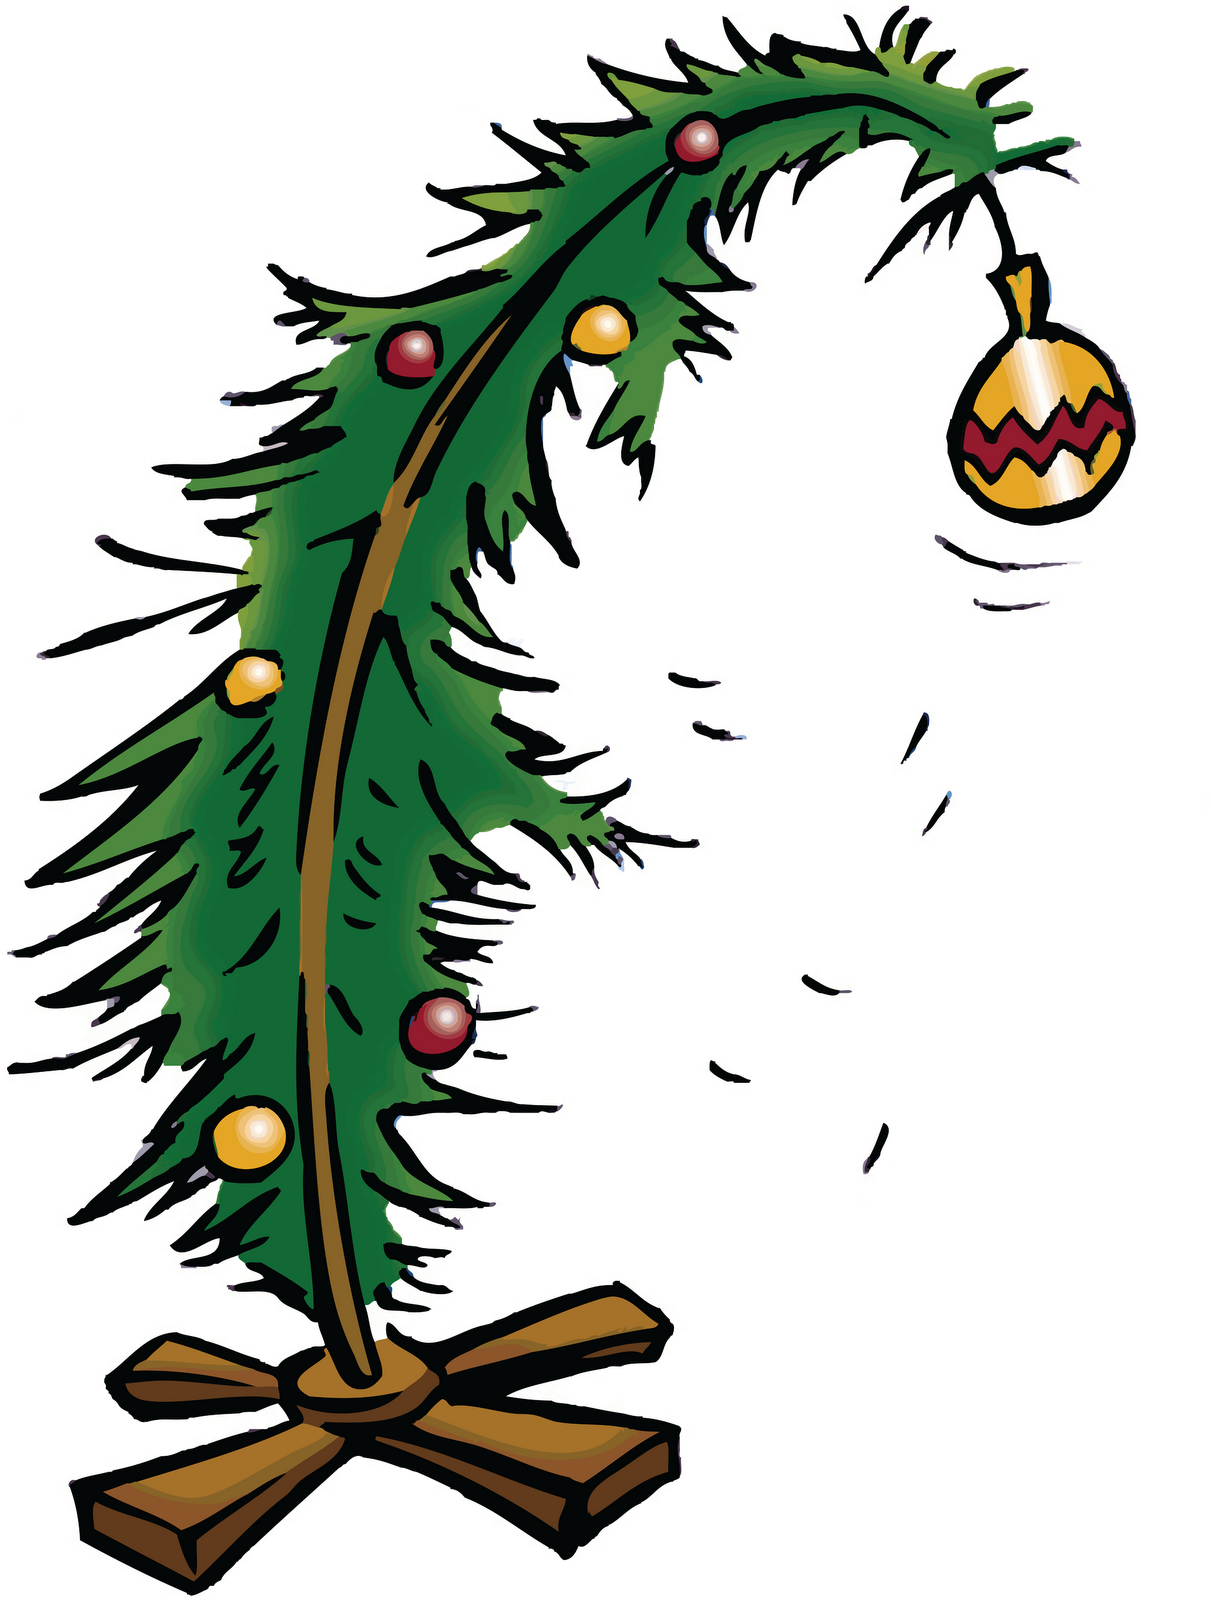 How the stole christmas. Grinch clipart plant